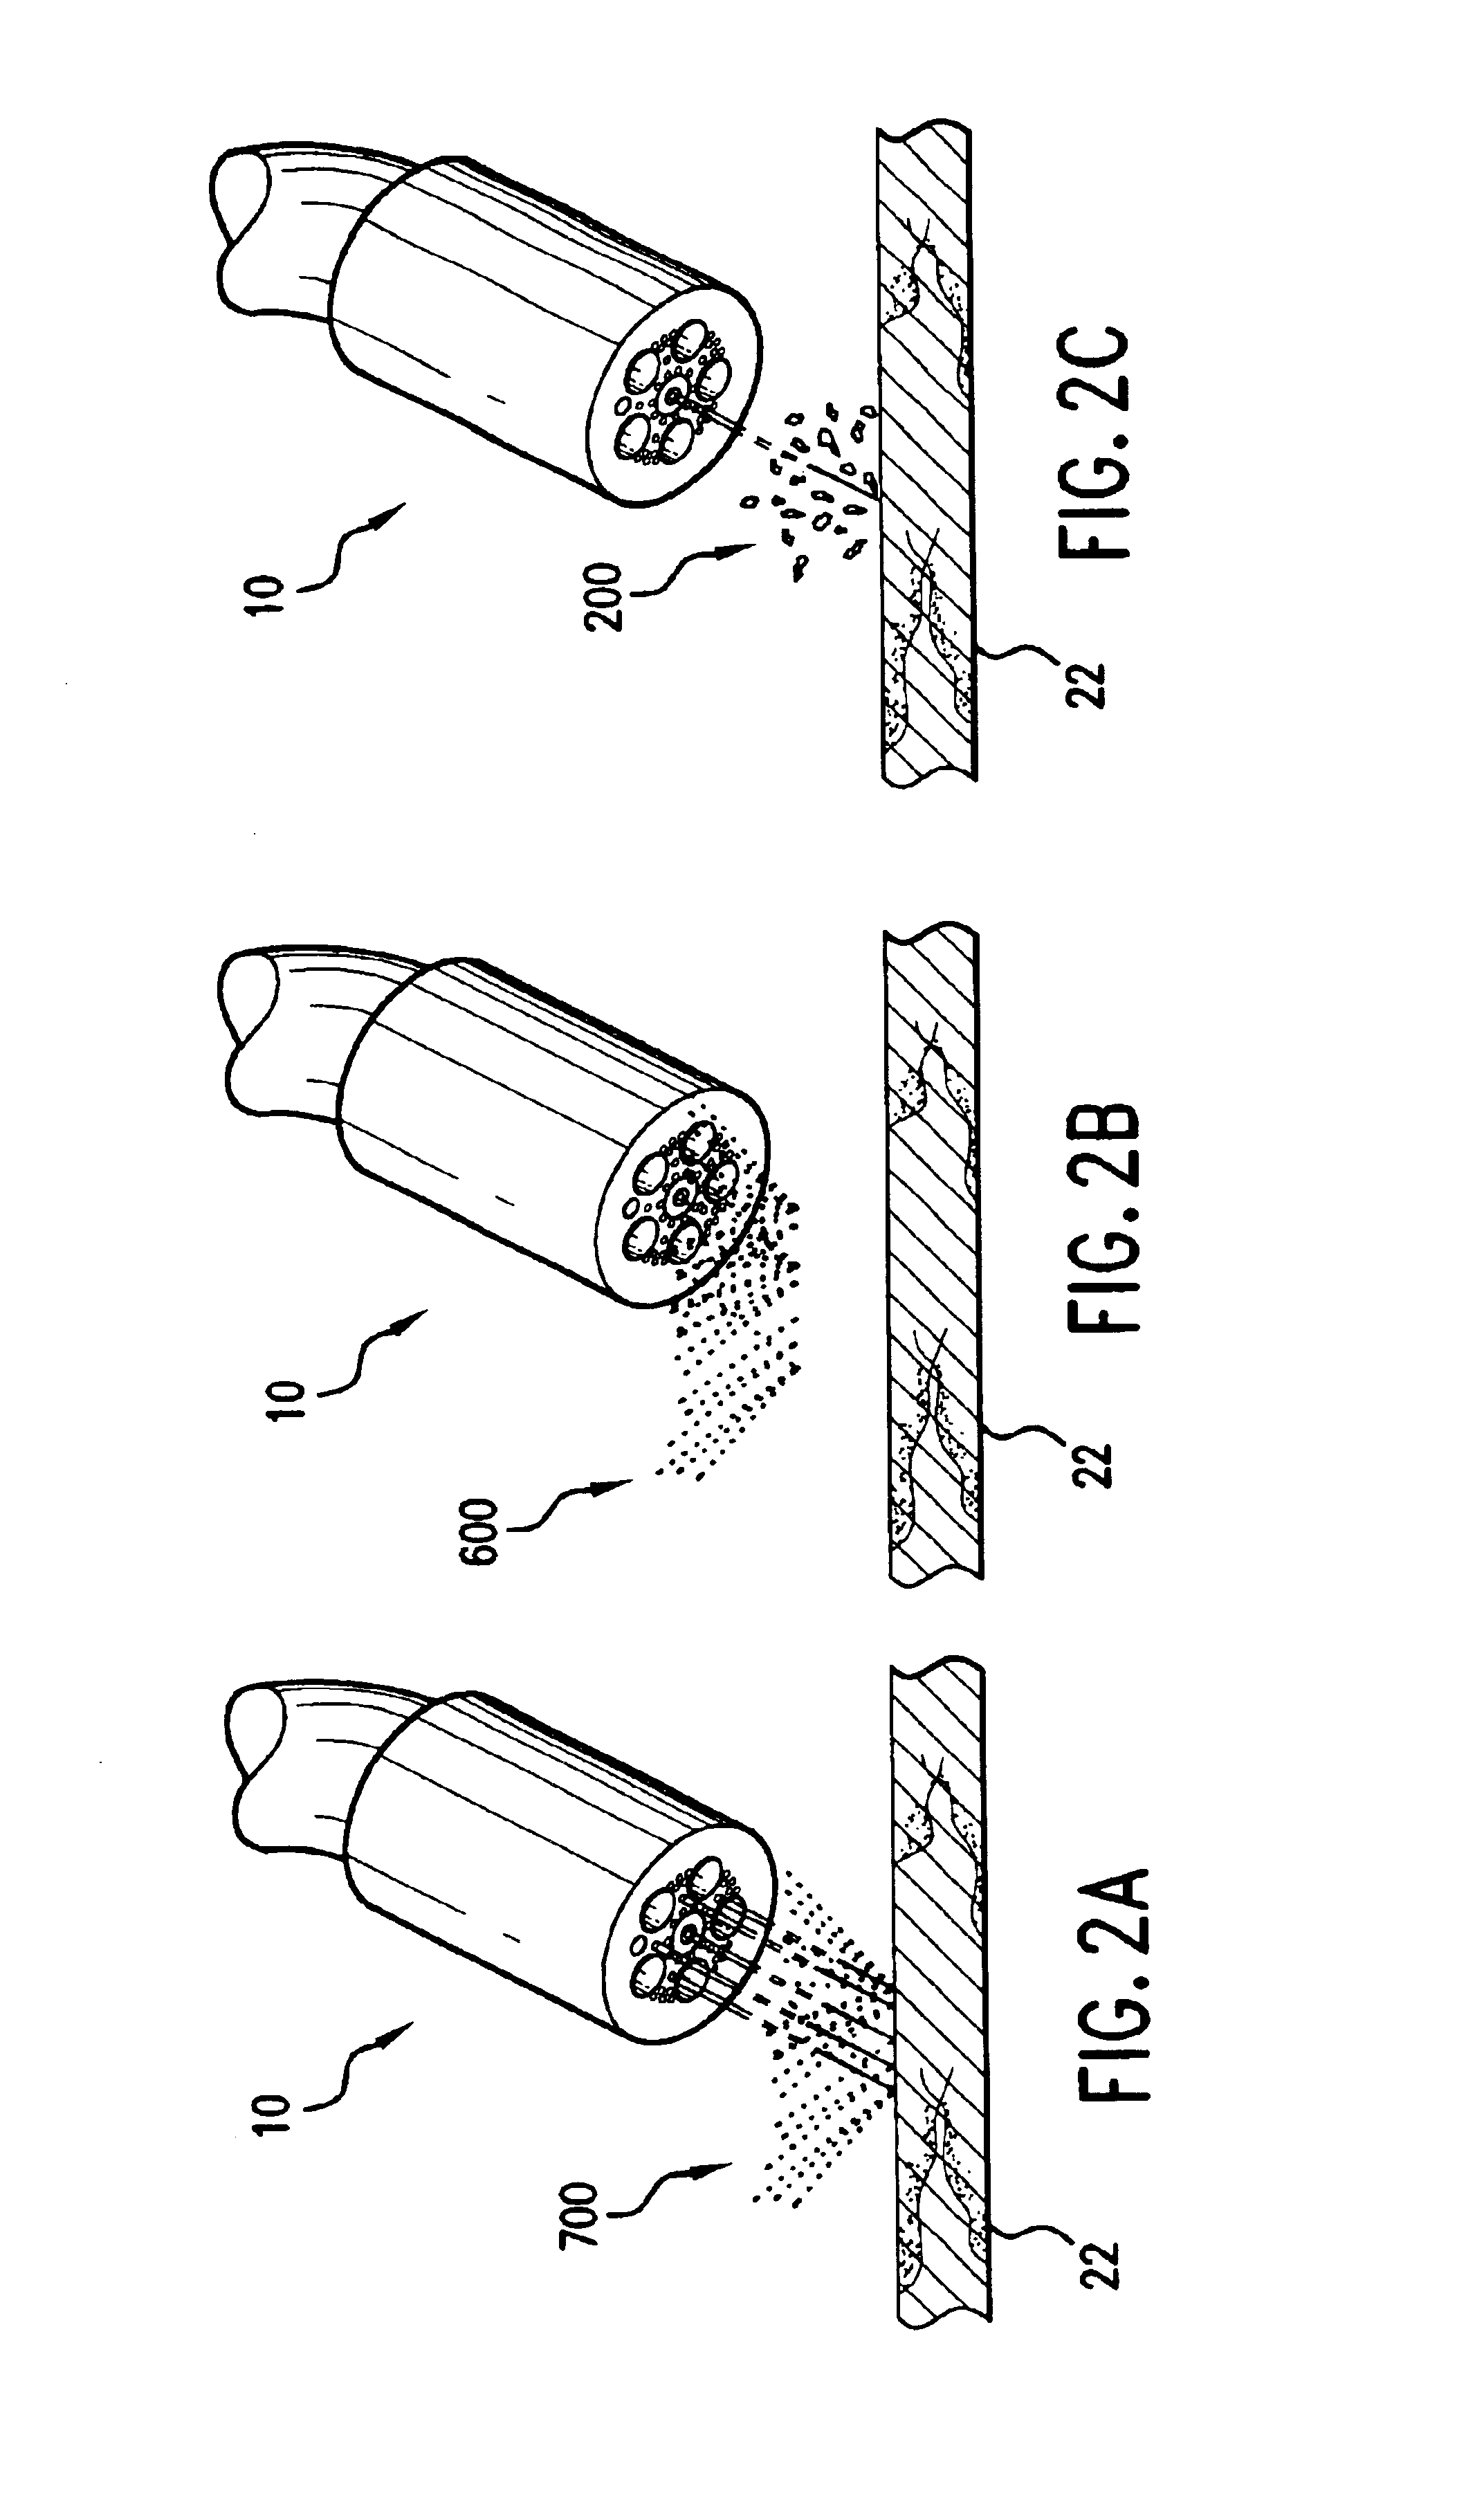 Architecture tool and methods of use